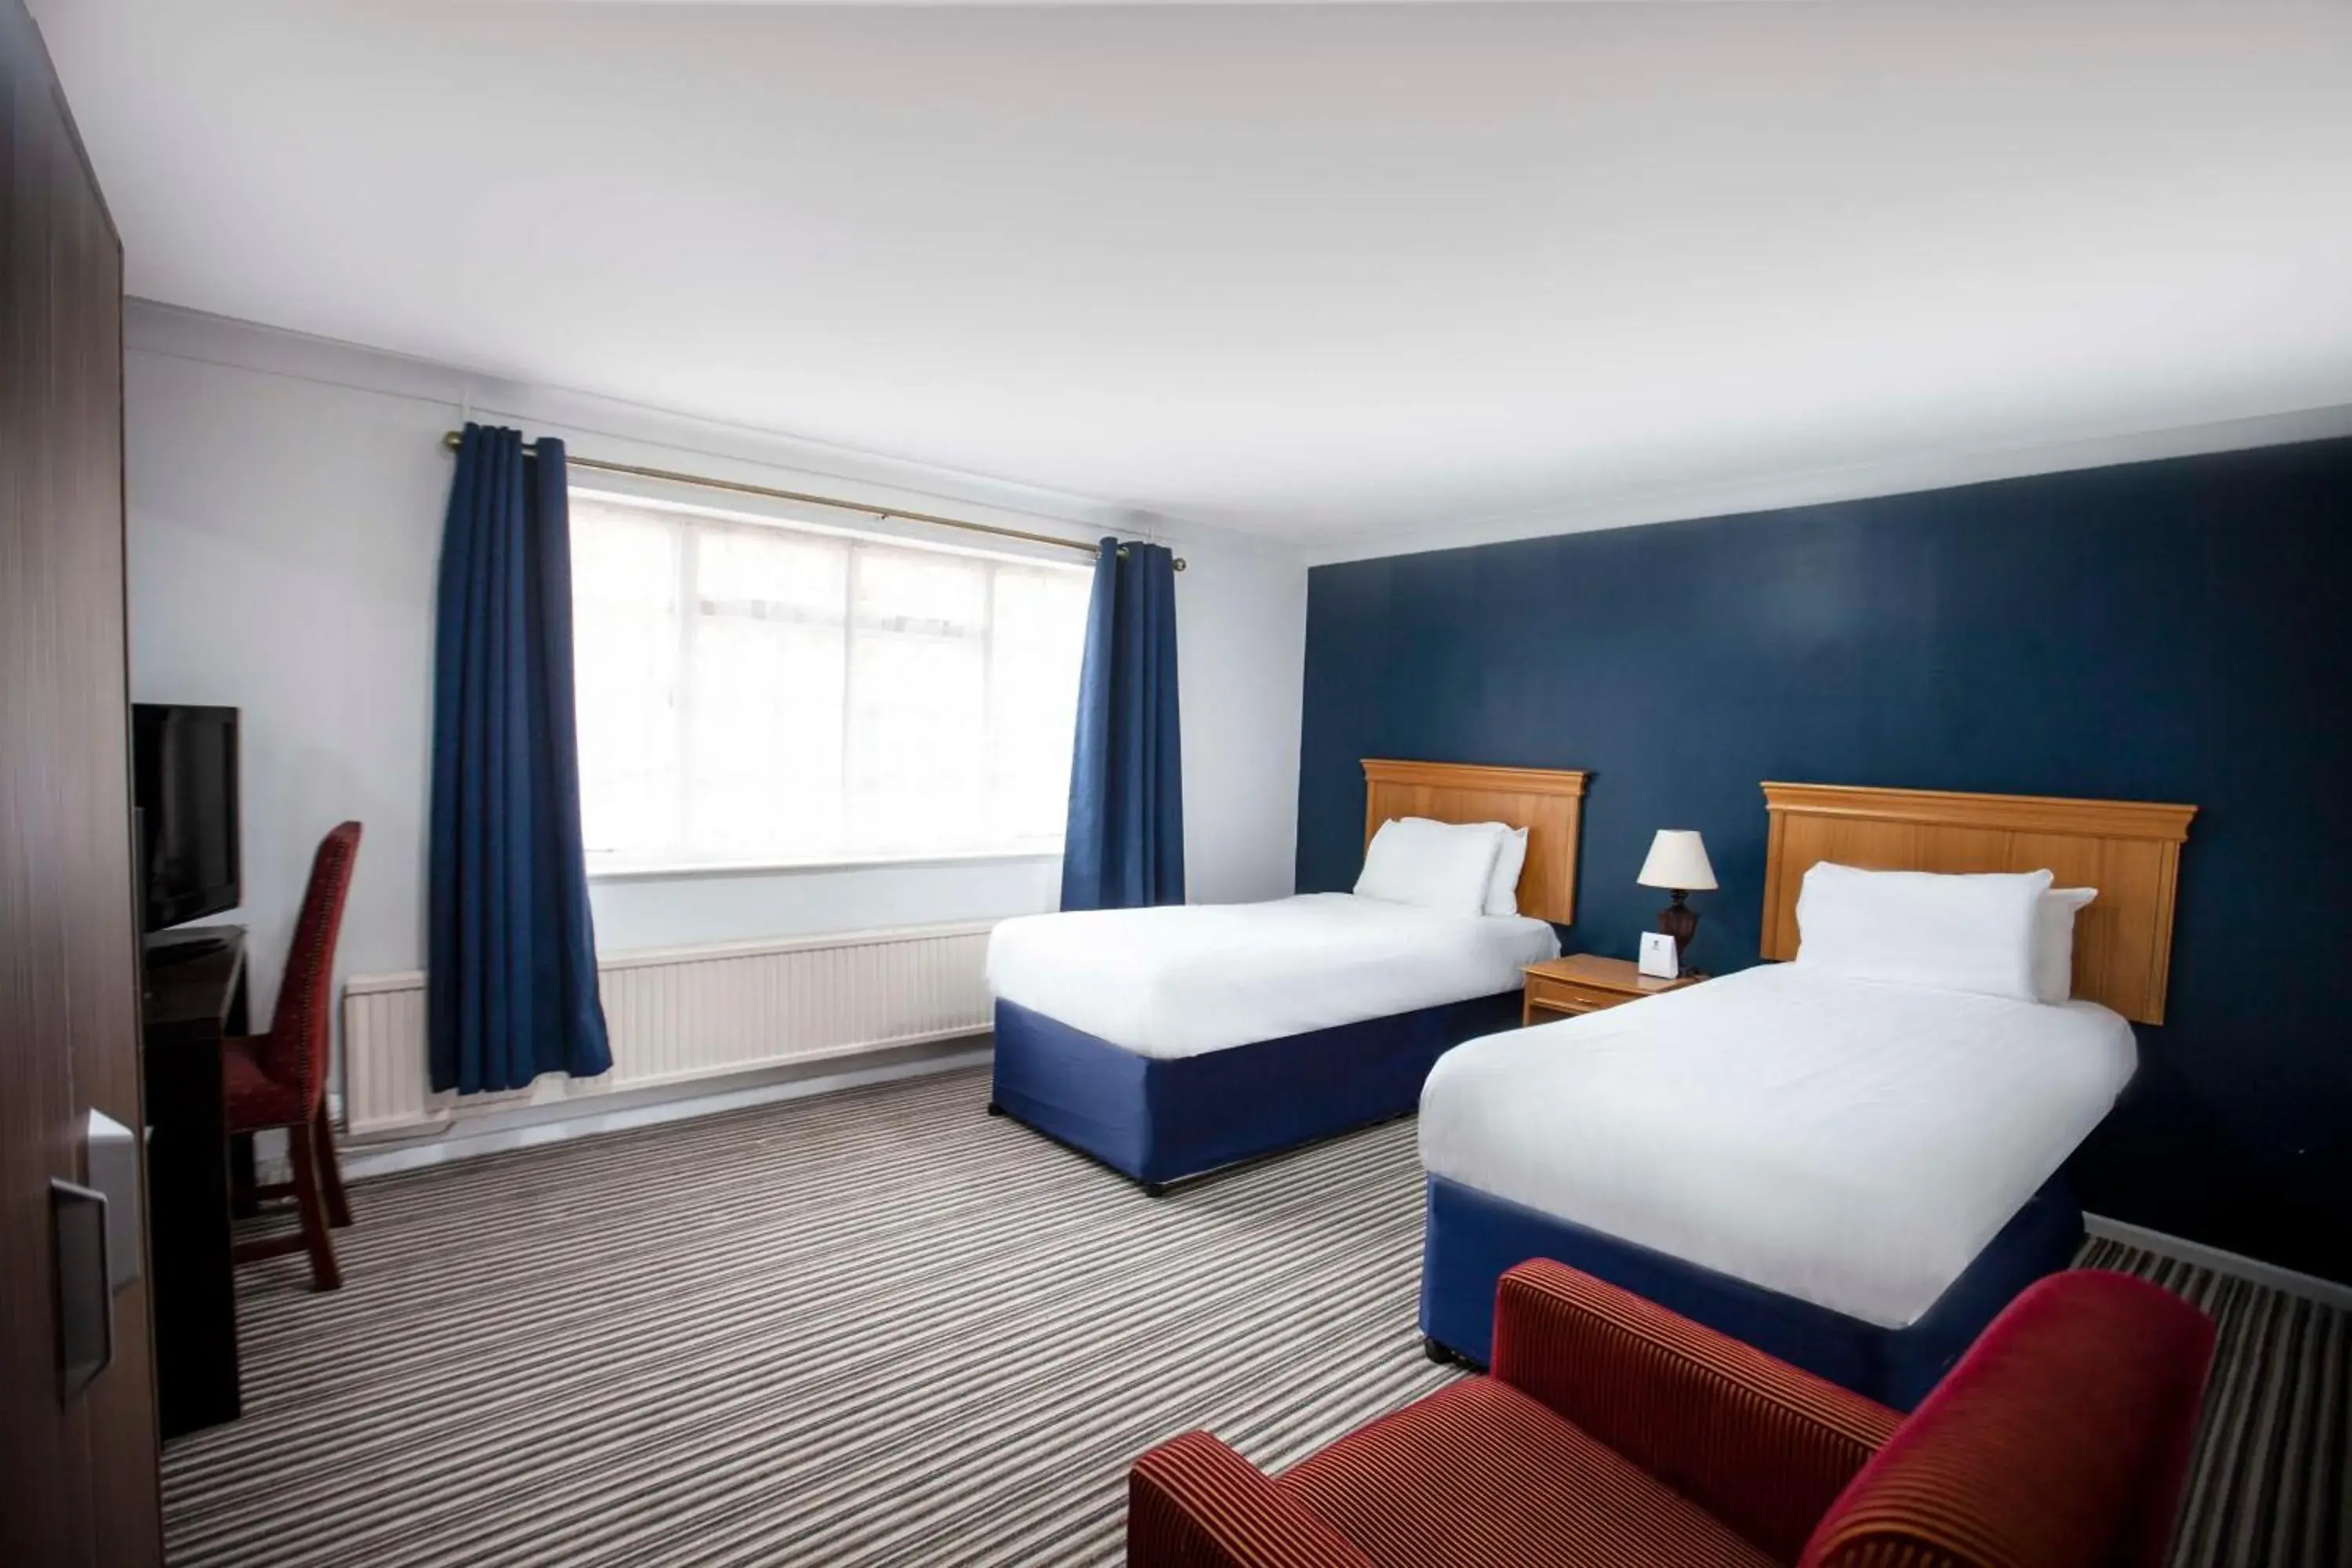 Standard Double Room with Two Single Beds - Non-Smoking in Best Western Brome Grange Hotel